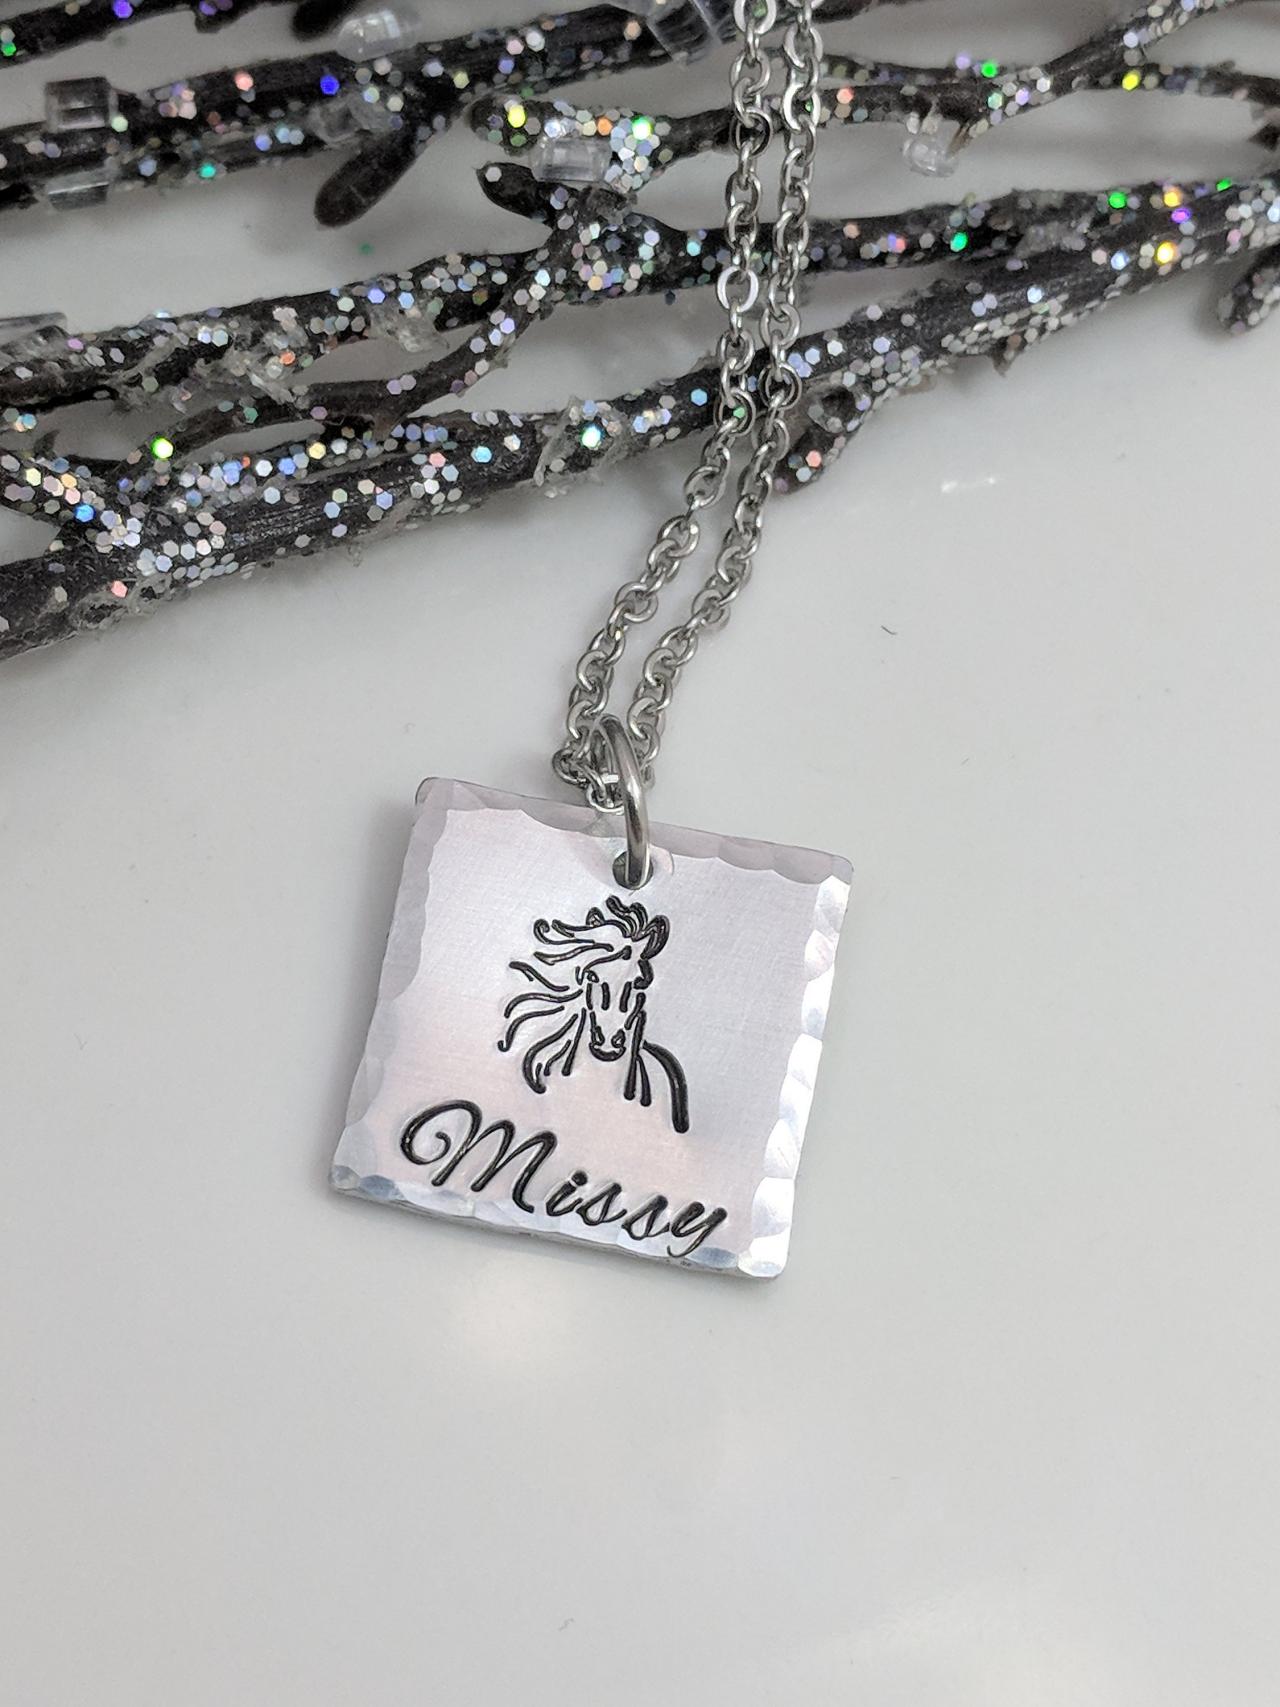 Horse Lover Jewelry- Horse Necklace- Personalized- Gift For Horse Trainer- Horse Riding- Name Necklace- Gift For Her- Horse Lover Gifts